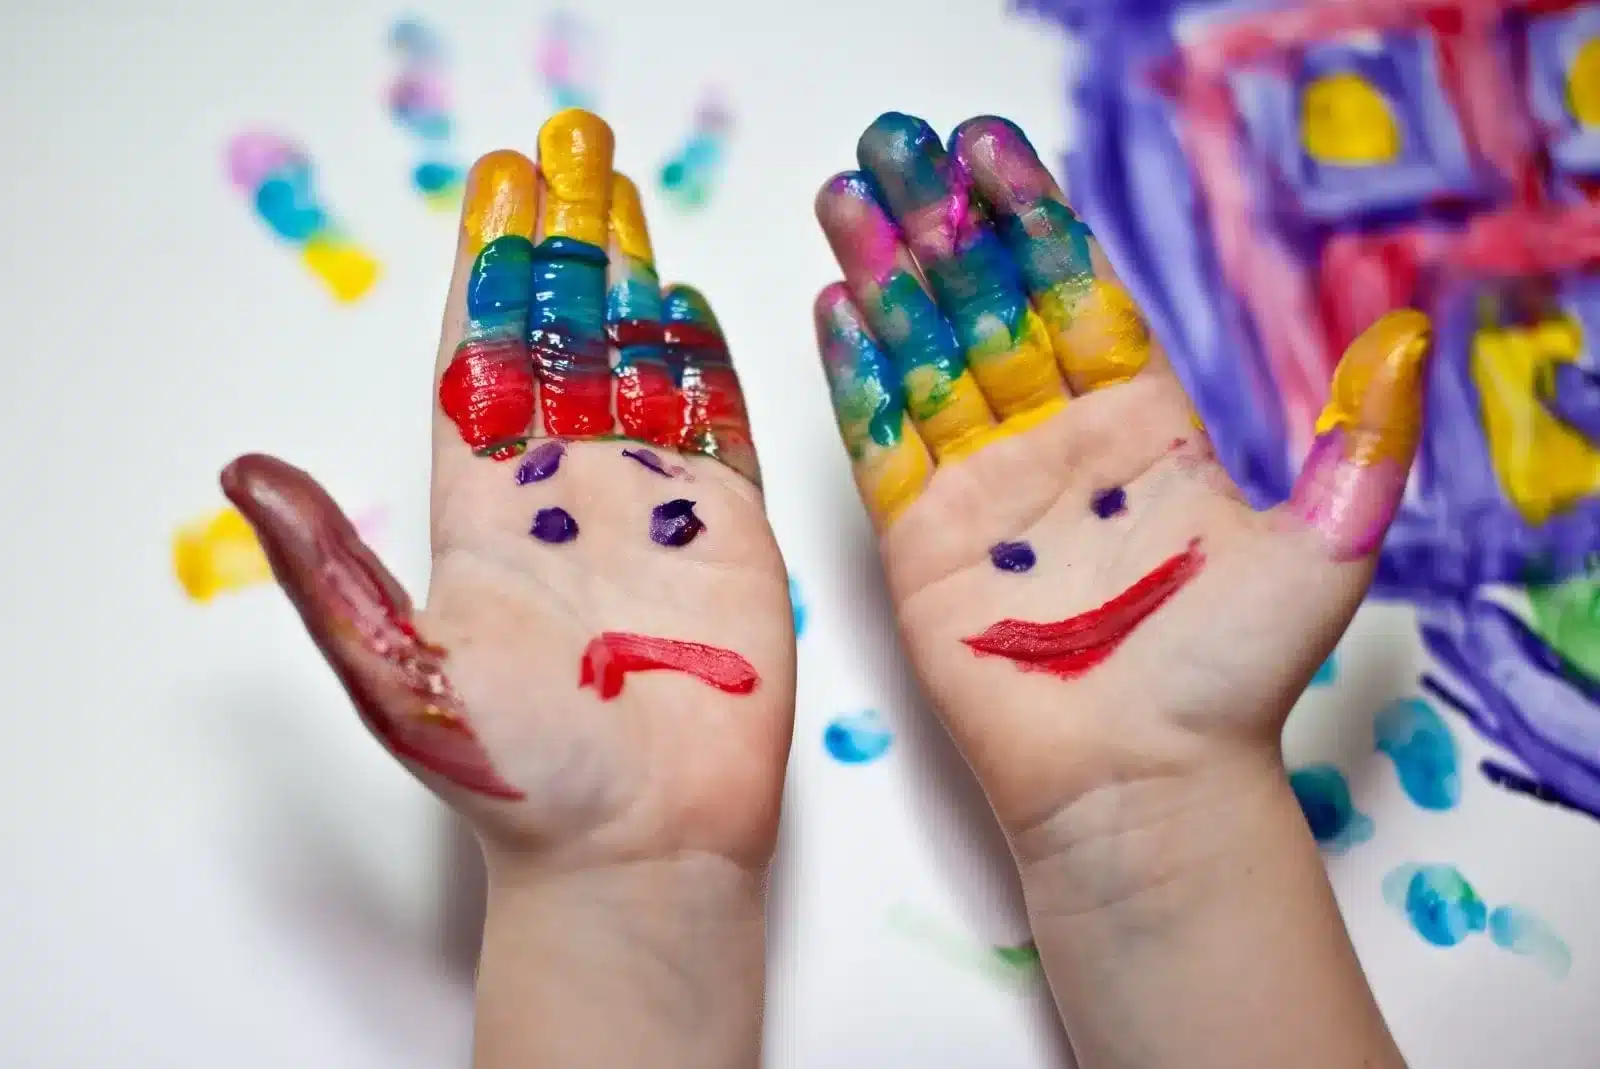 Painting smile and sad gesture on hands